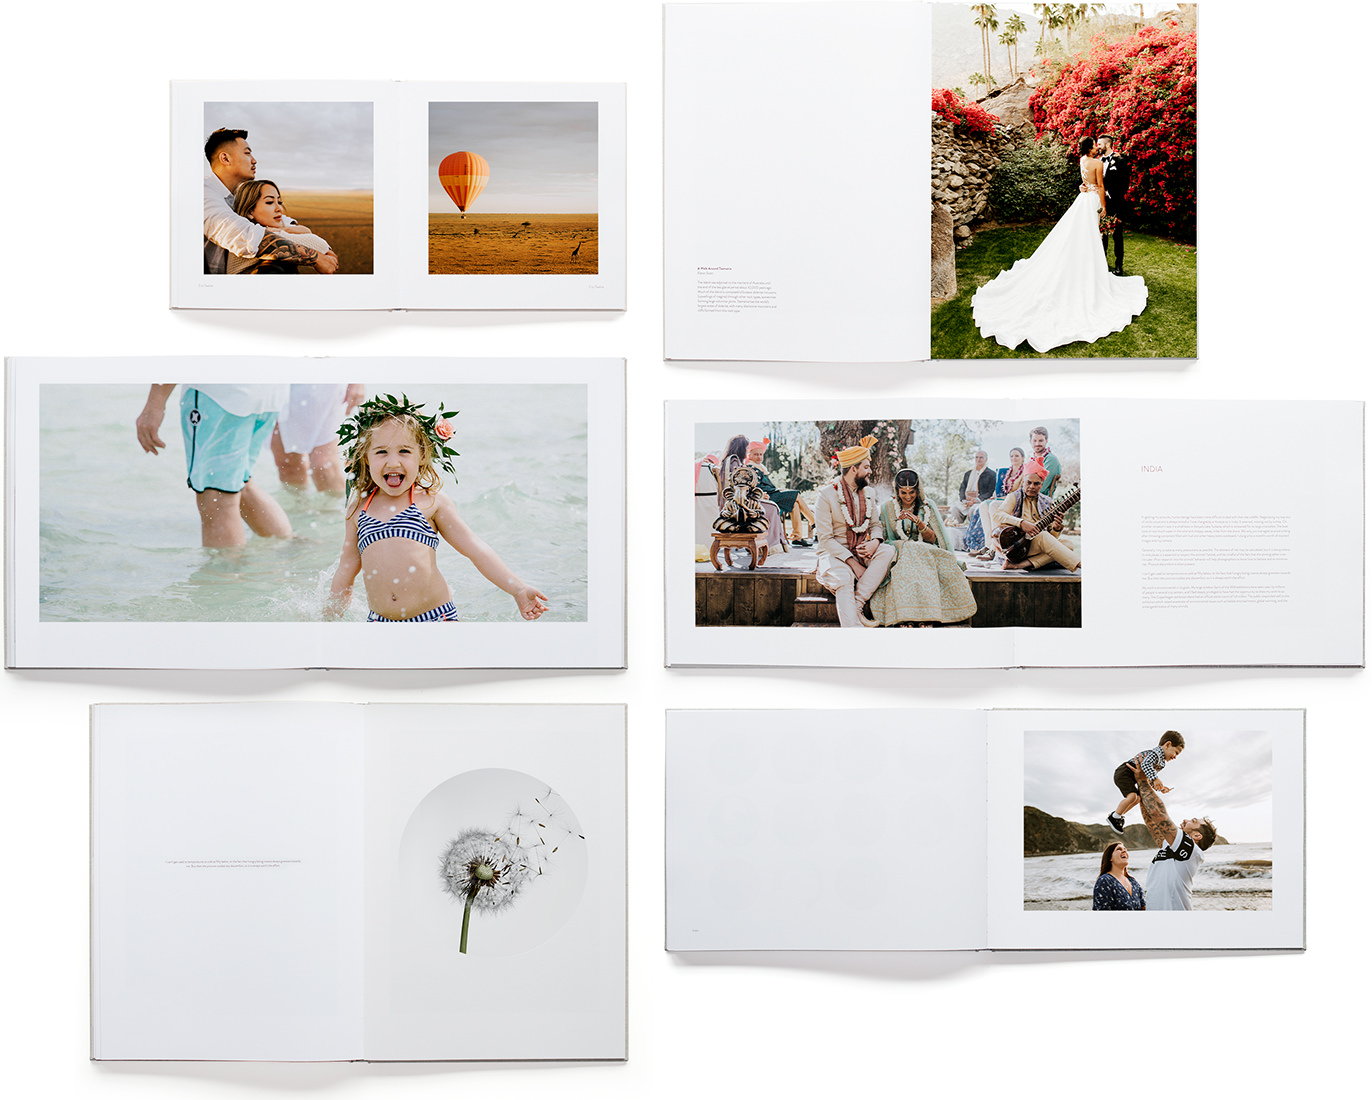 Selection of classic photo albums showing photo templates